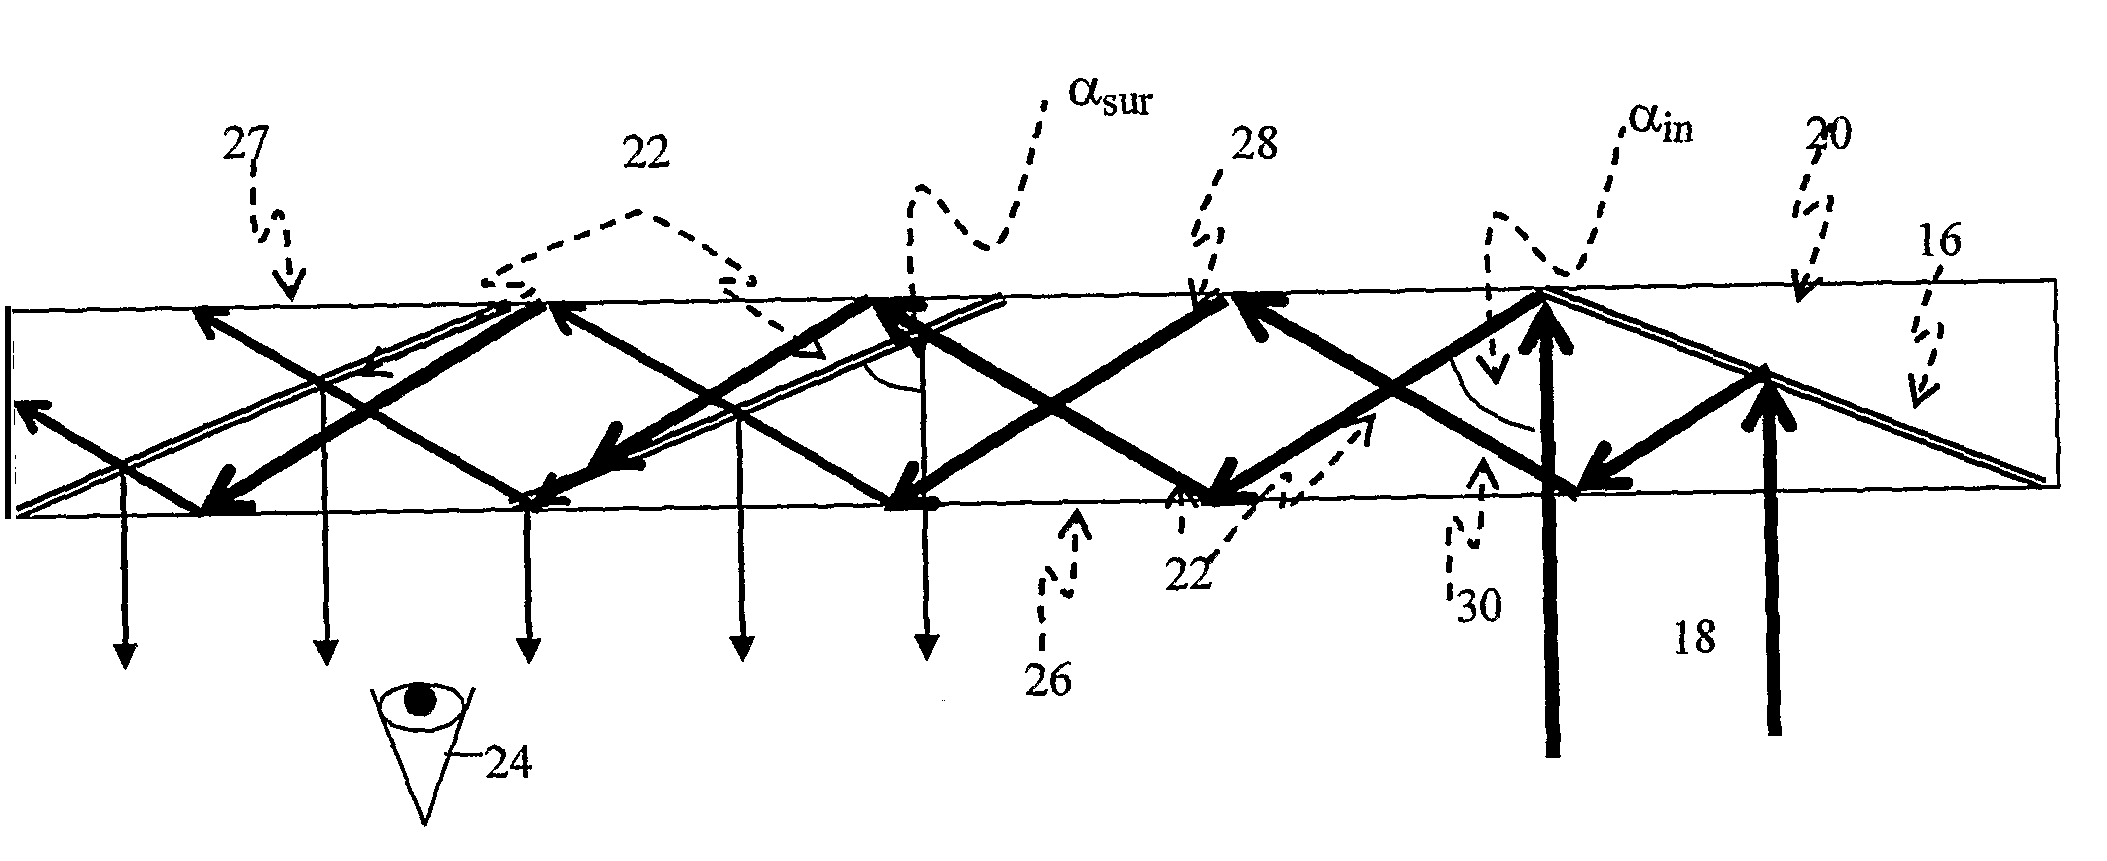 Substrate-guided optical device utilizing thin transparent layer